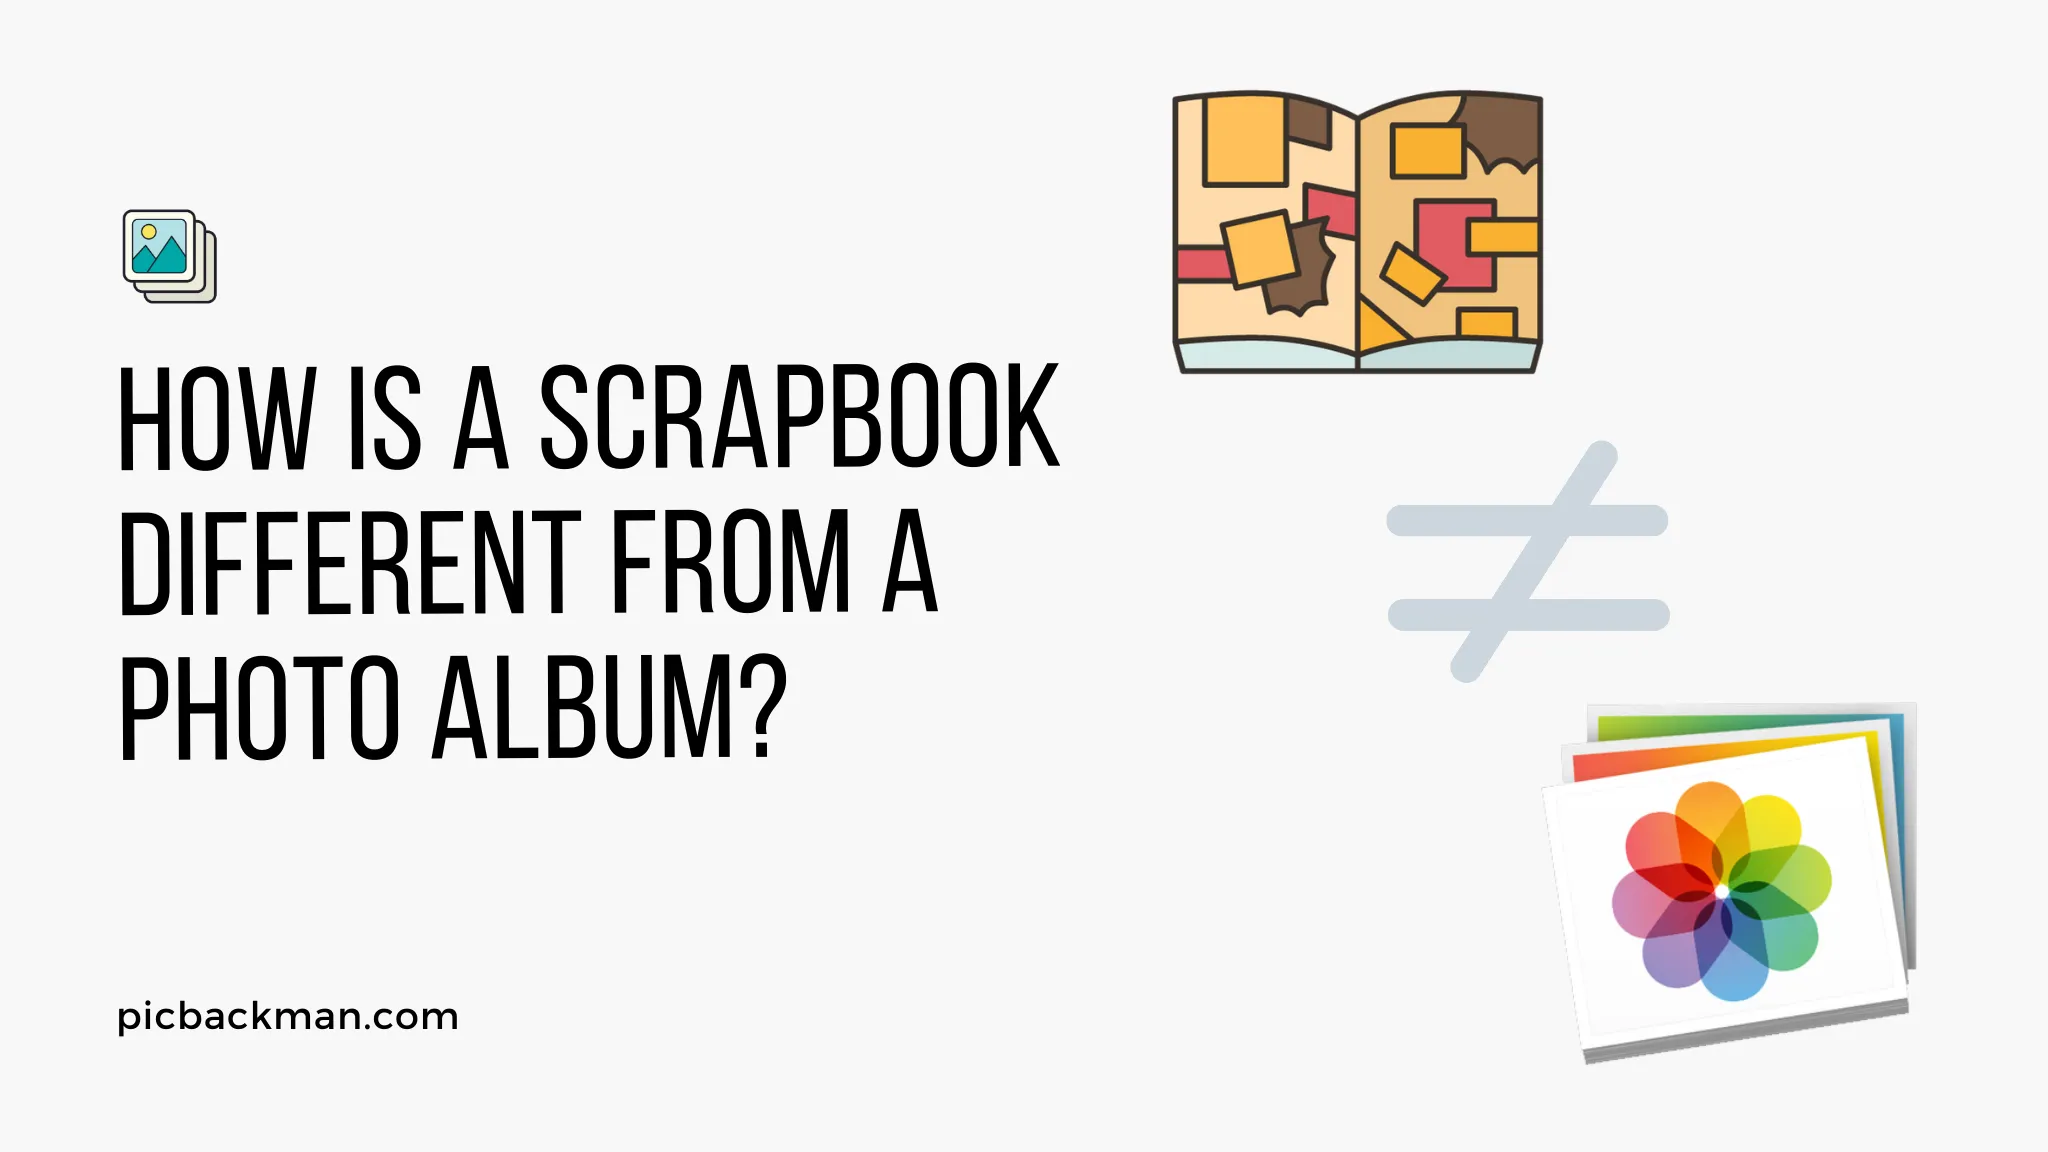 How is a scrapbook different from a photo album?